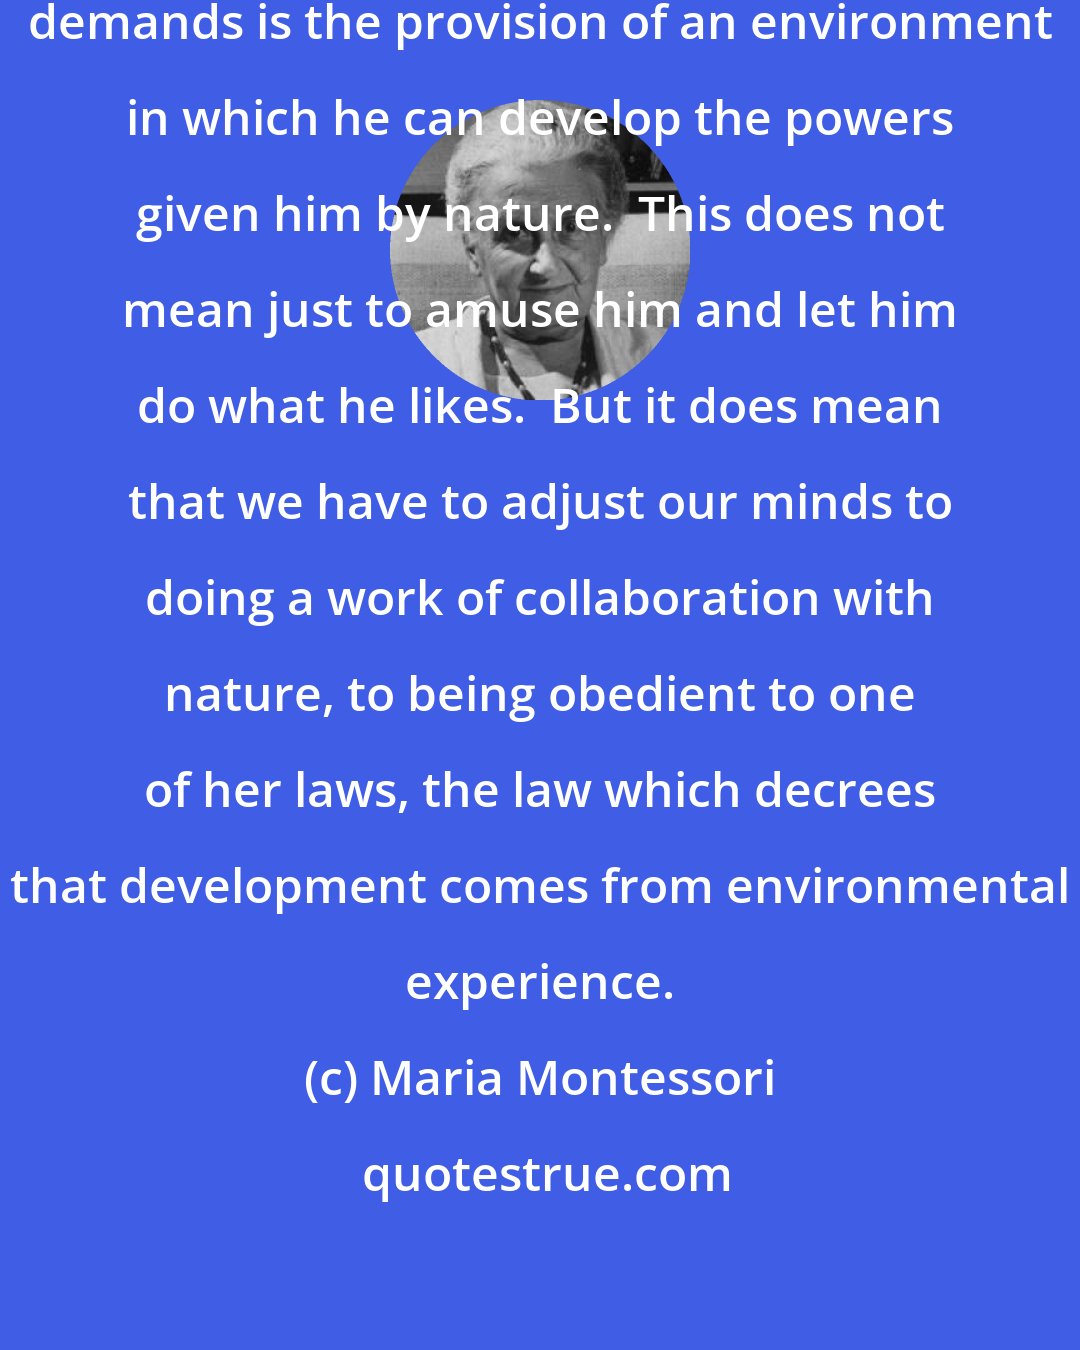 Maria Montessori: ... the first thing his education demands is the provision of an environment in which he can develop the powers given him by nature.  This does not mean just to amuse him and let him do what he likes.  But it does mean that we have to adjust our minds to doing a work of collaboration with nature, to being obedient to one of her laws, the law which decrees that development comes from environmental experience.